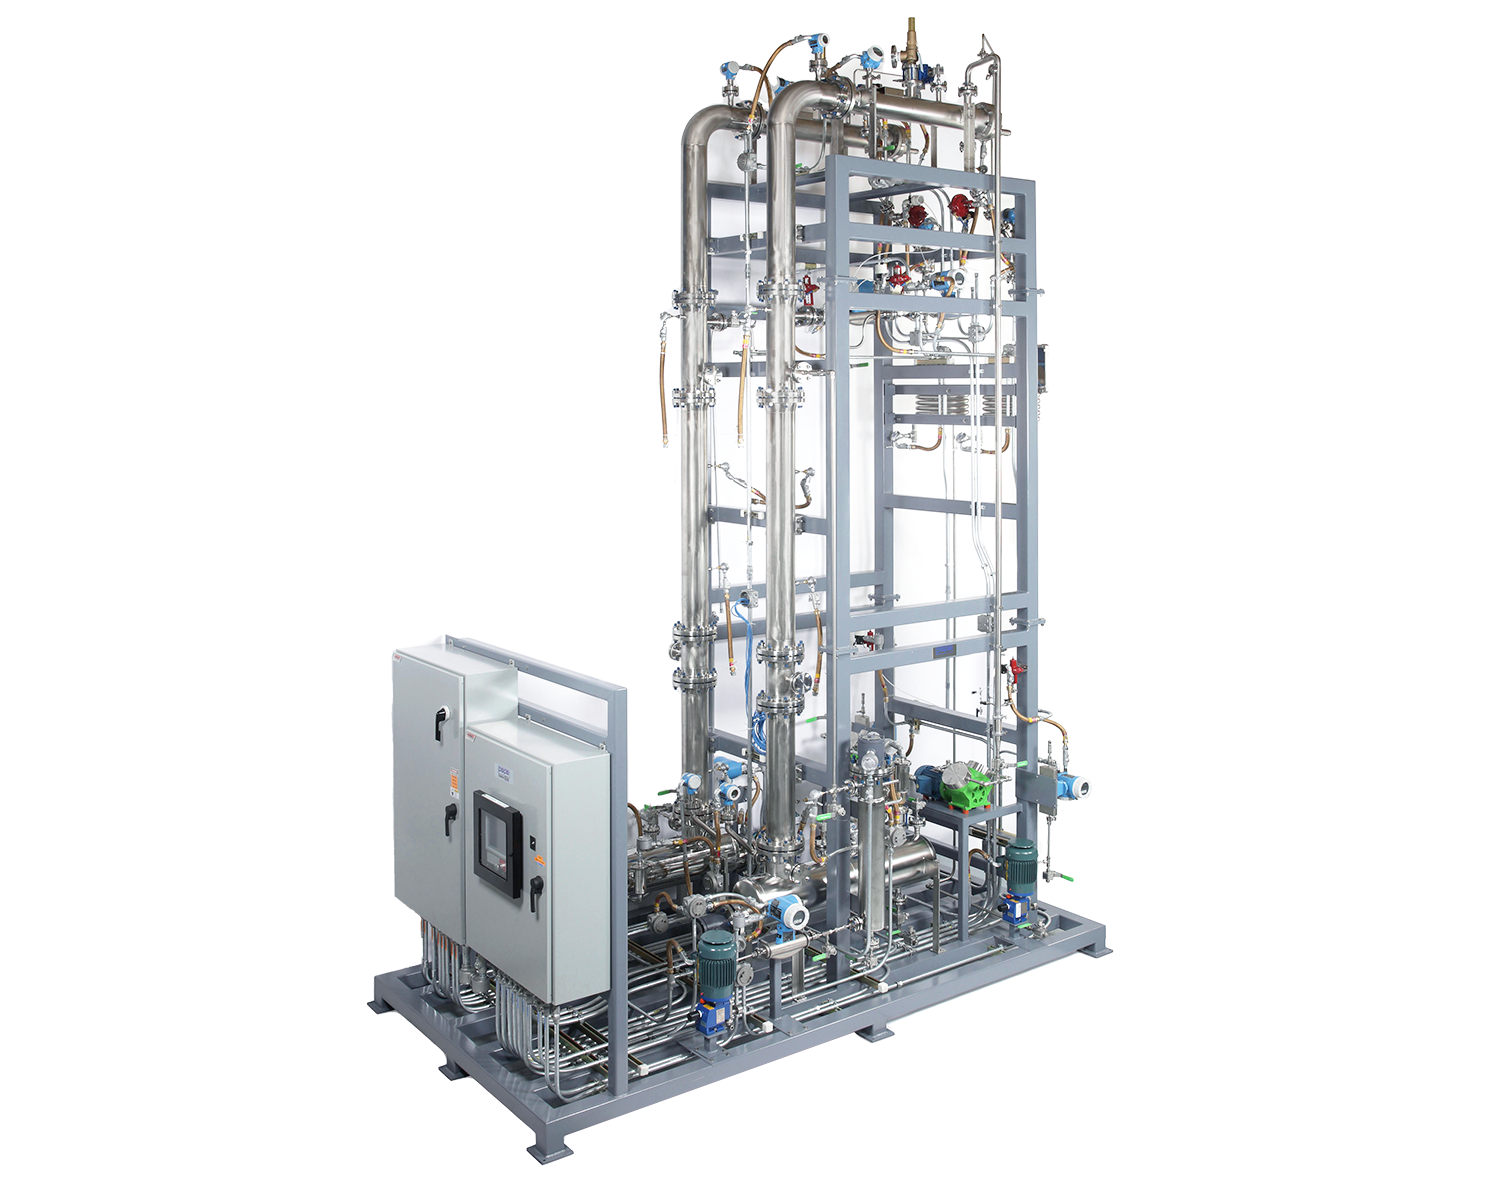 Turnkey Fractional Distillation Equipment - Continuous Mode